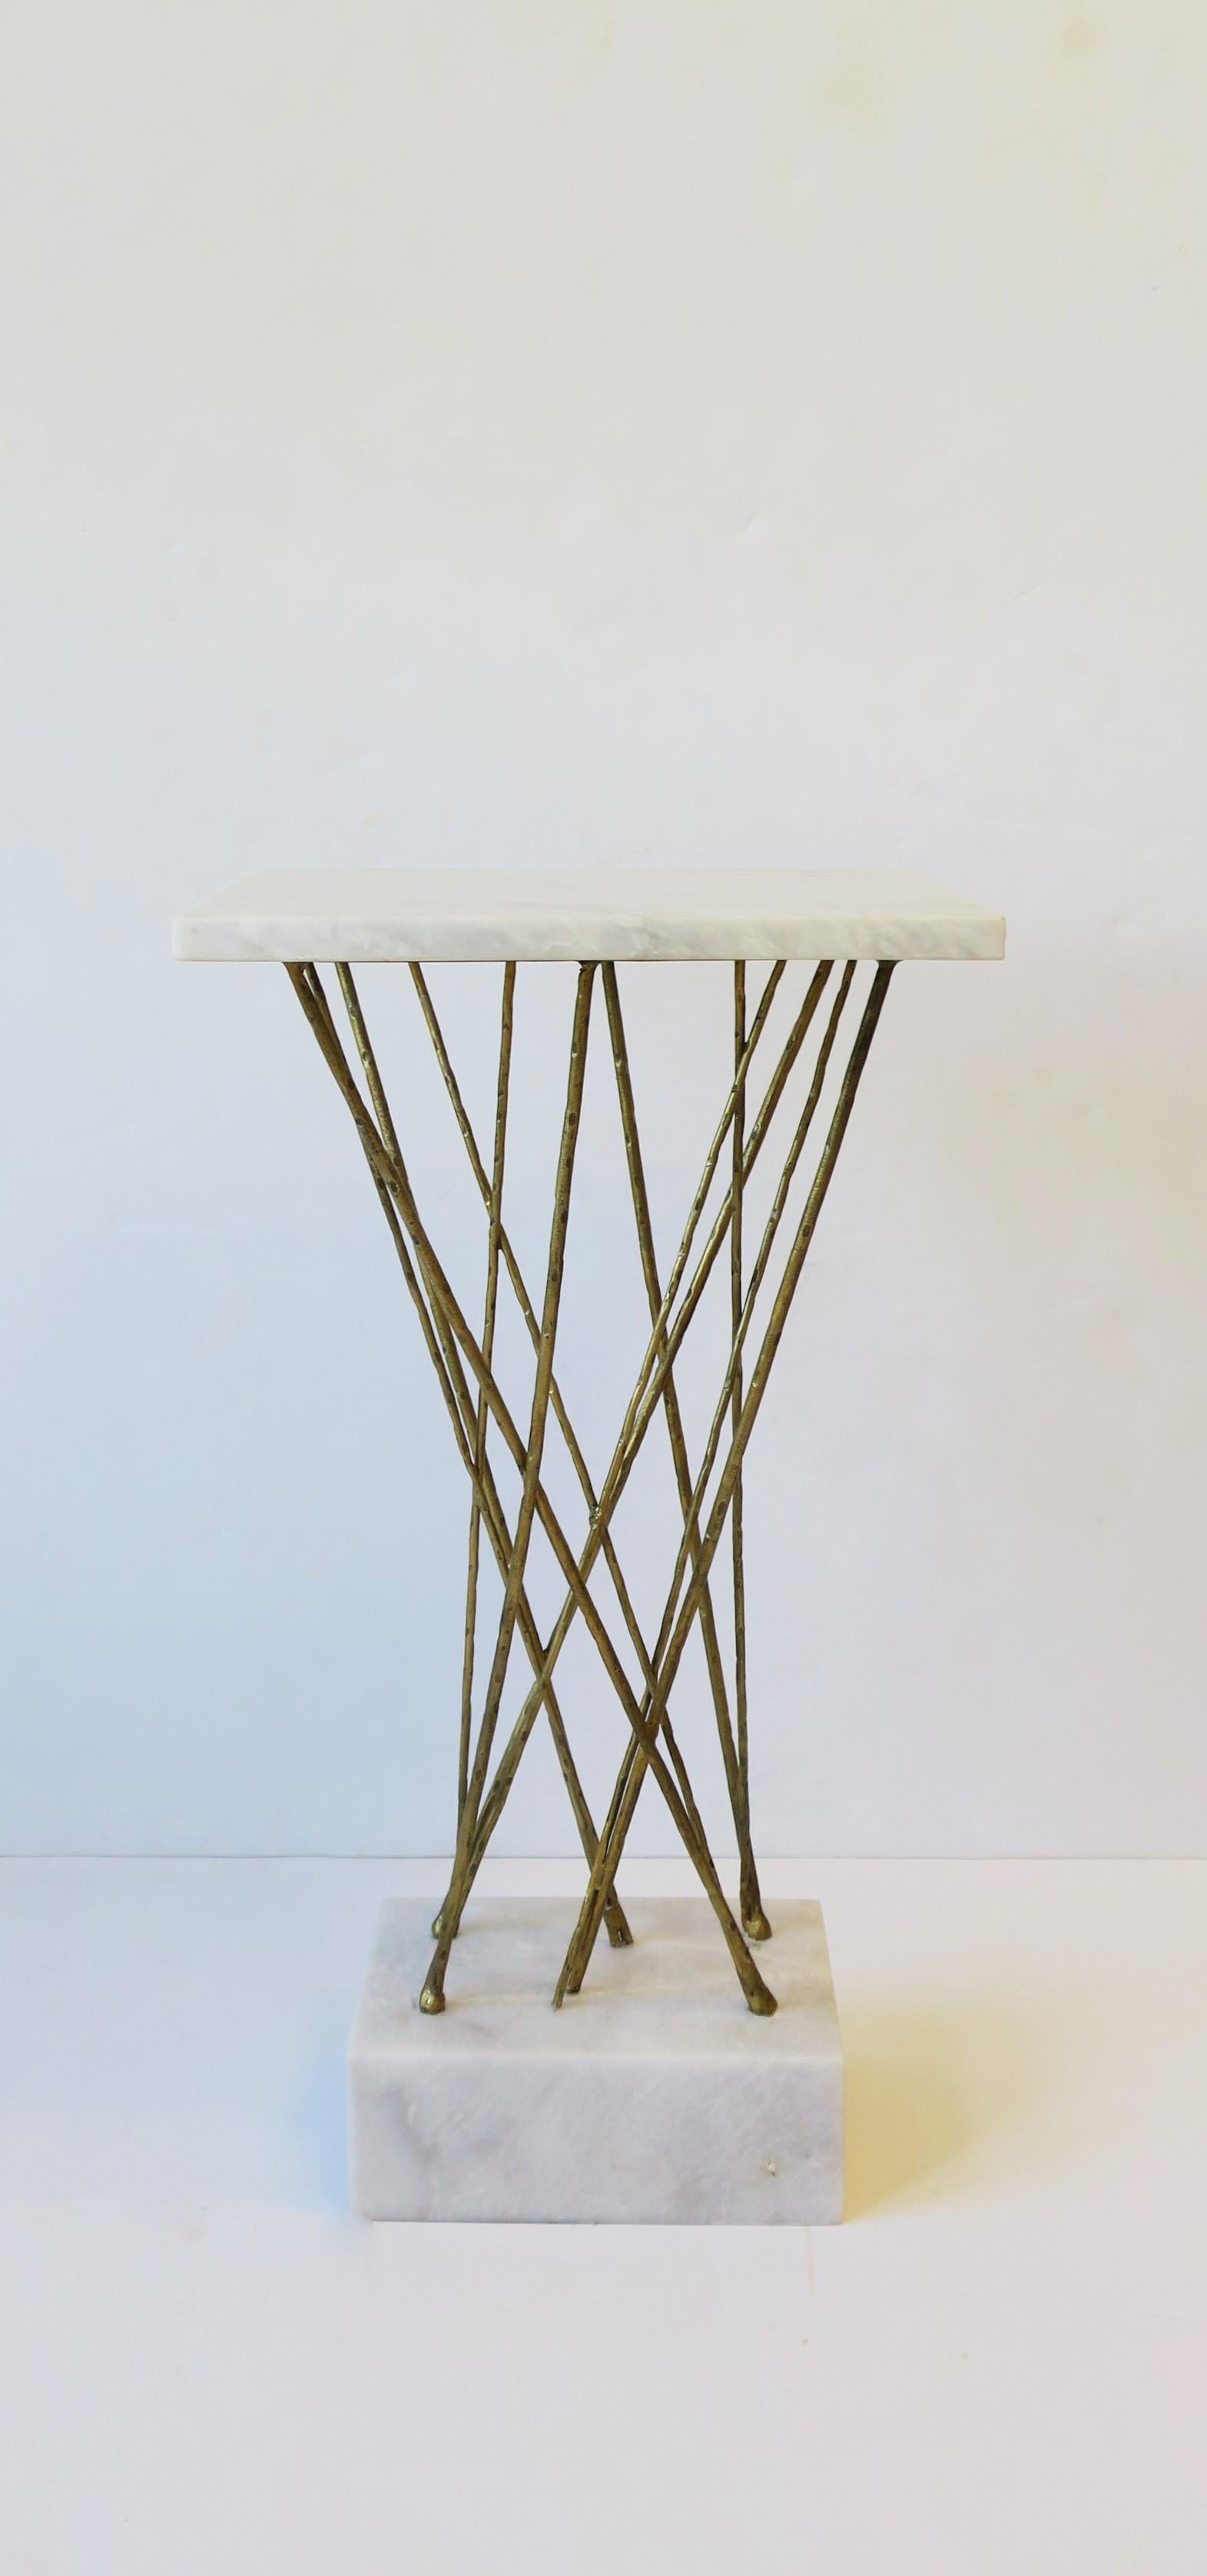 A substantial marble side or drinks pedestal table with a brass colored gold-tone metal geometric center. Table has a rectangular marble top, geometric gold-tone metal center, finished with a substantial marble base (base is 3